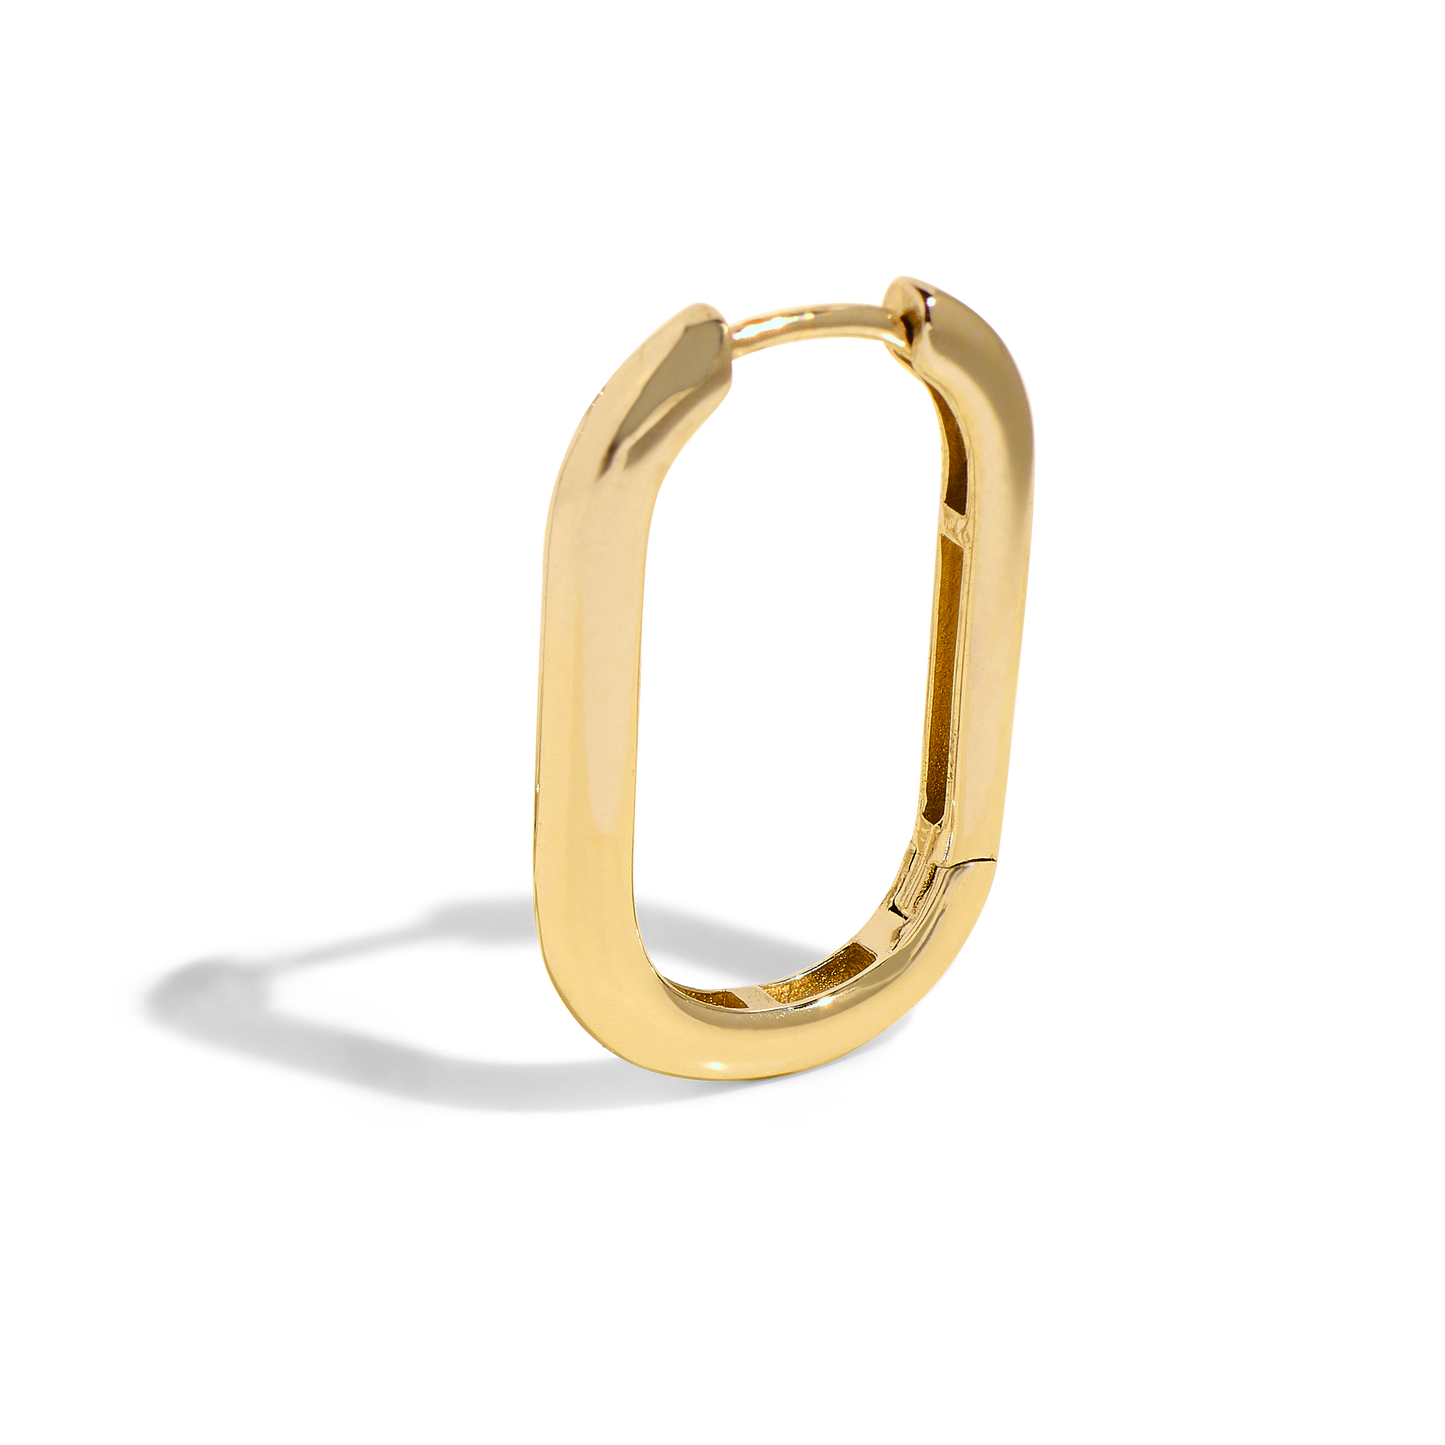 THE HARLEY HOOP - Solid 14k yellow gold